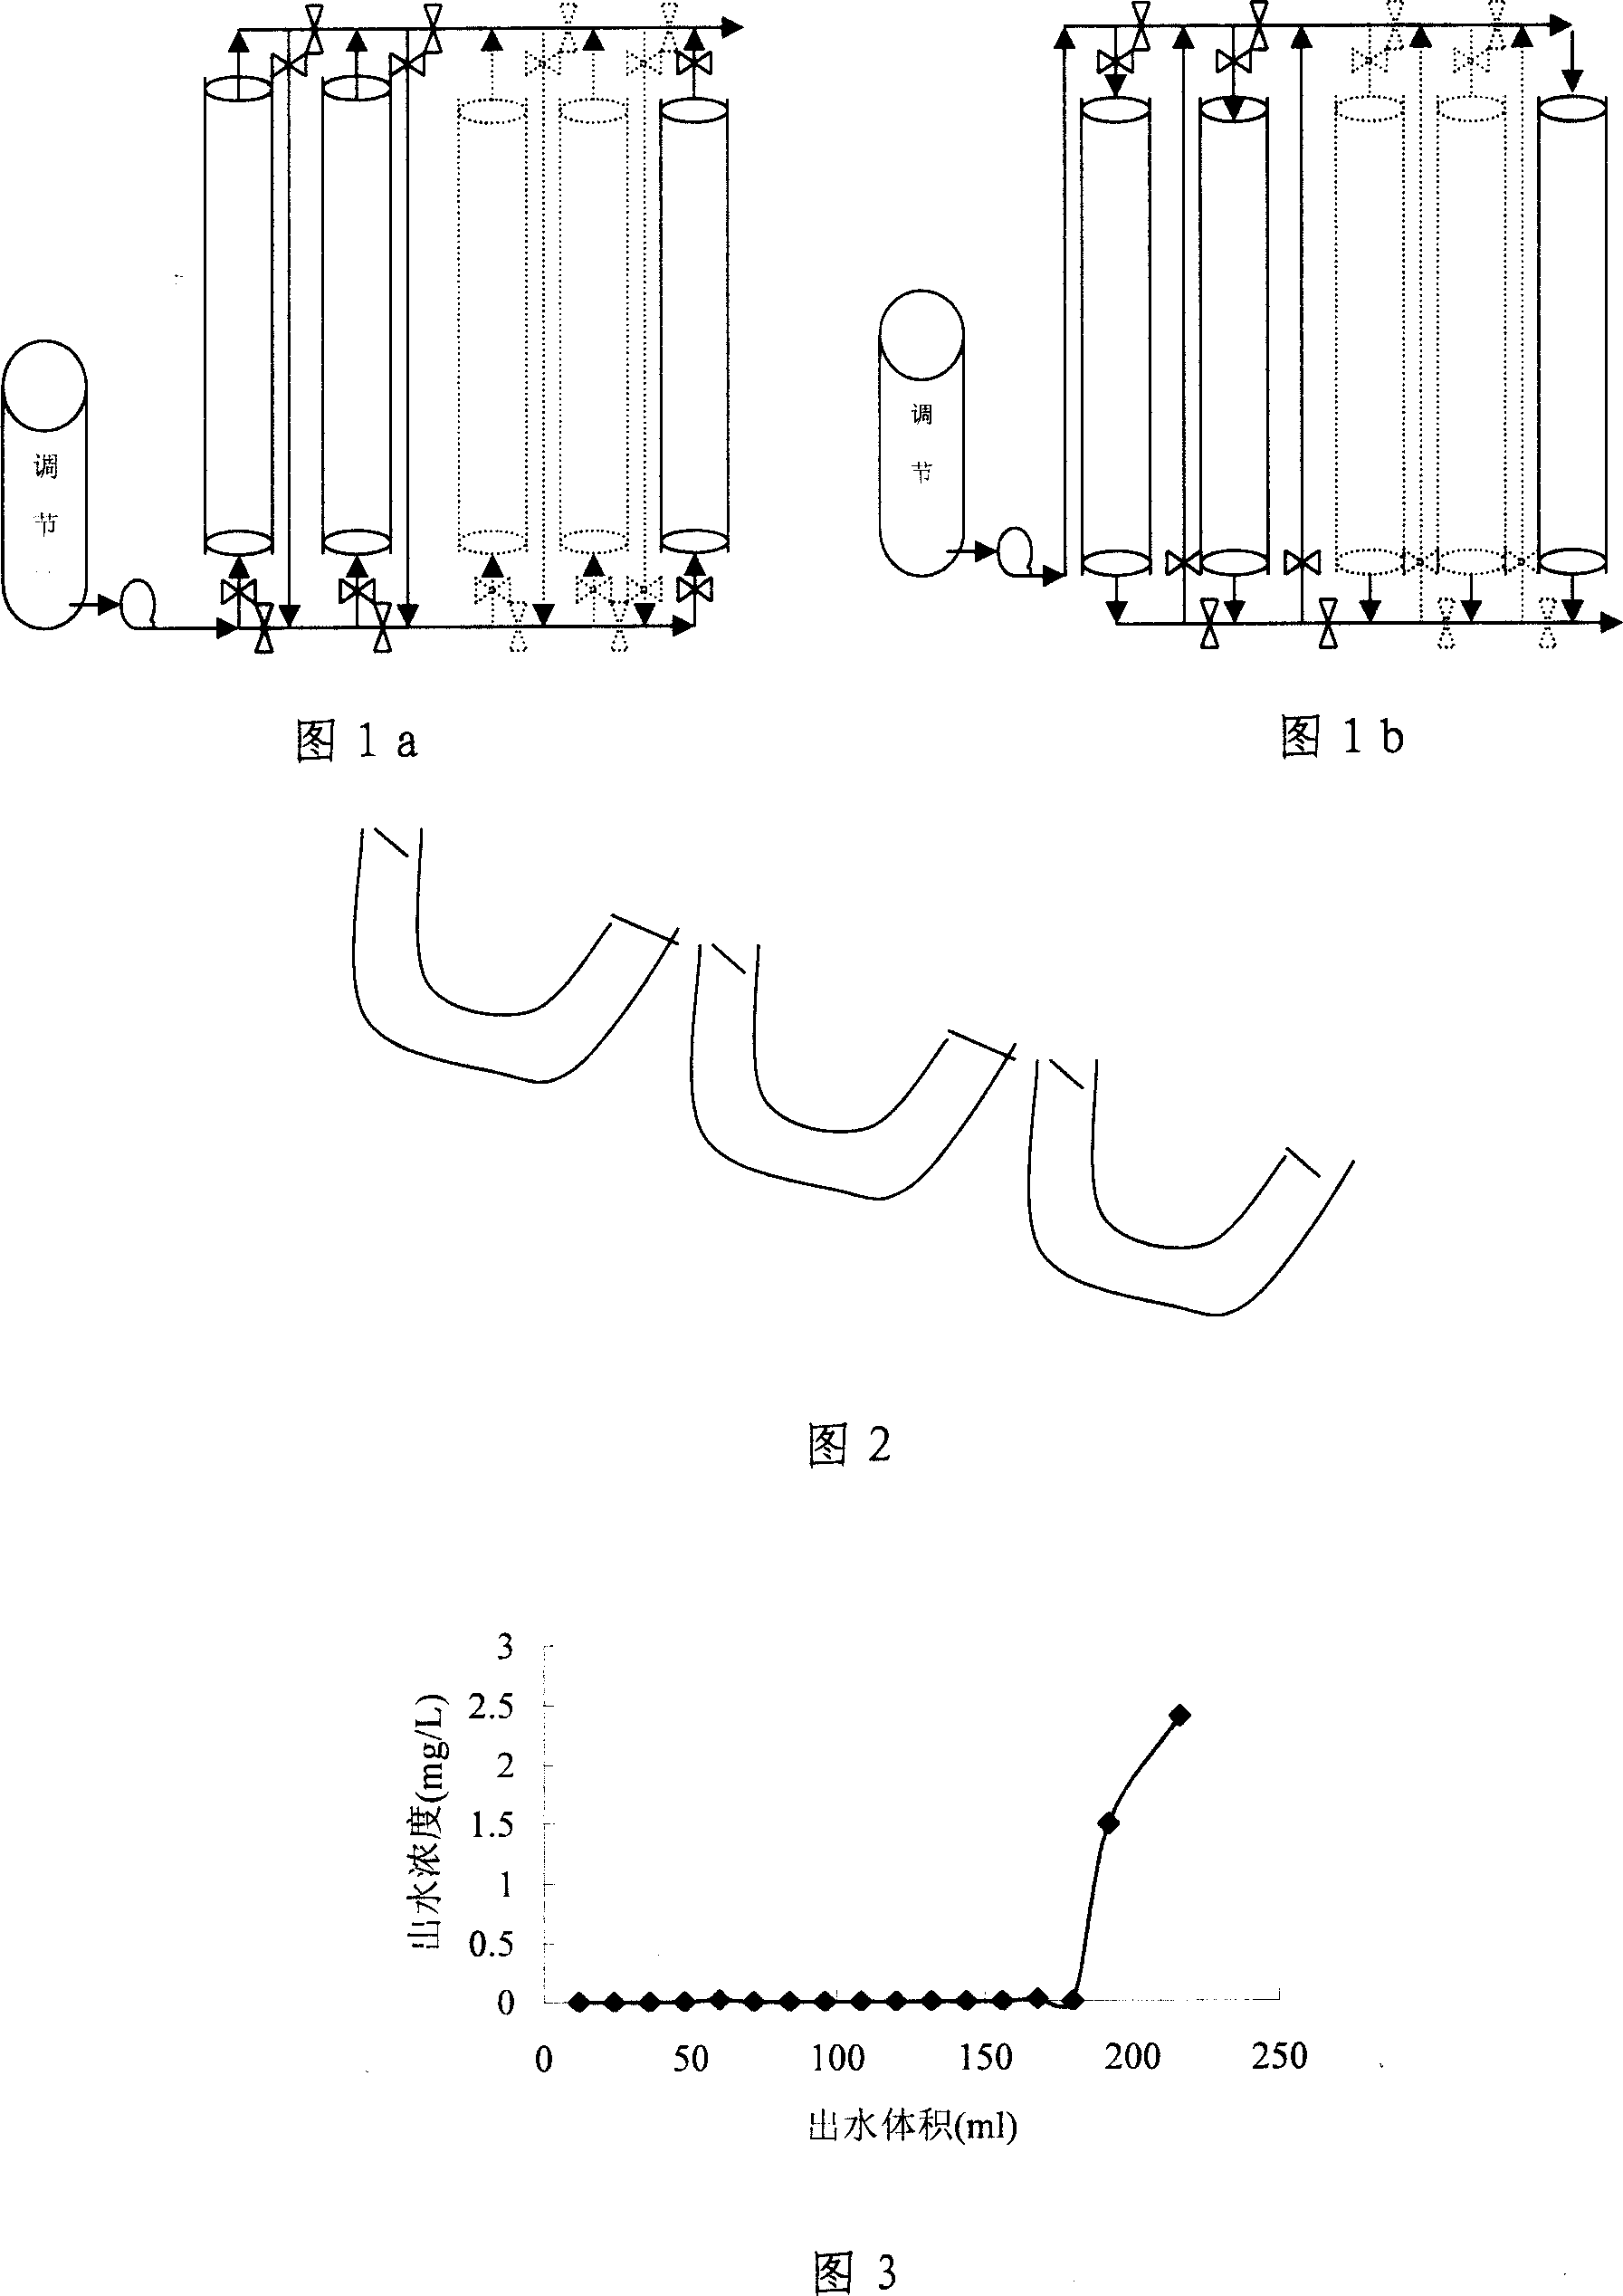 Multistage gradient adsorption channel adsorption technology